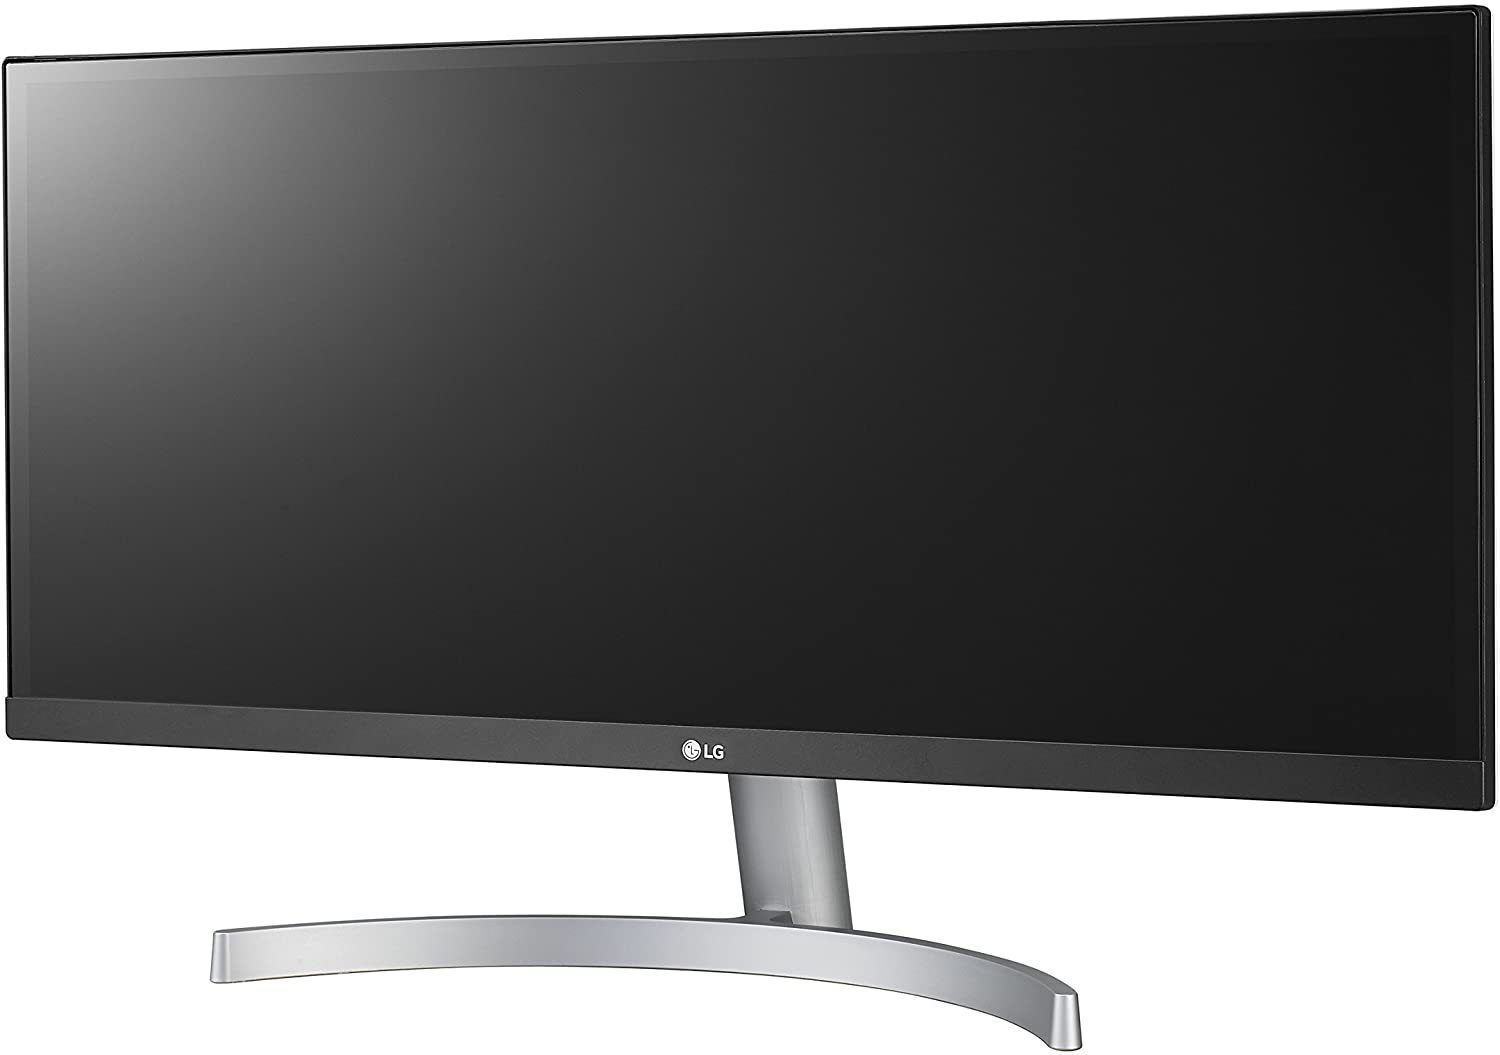 Lg 29Wk600-W 29" Ultrawide 21:9 Ips Multitasking Monitor With Hdr10 And Freesync